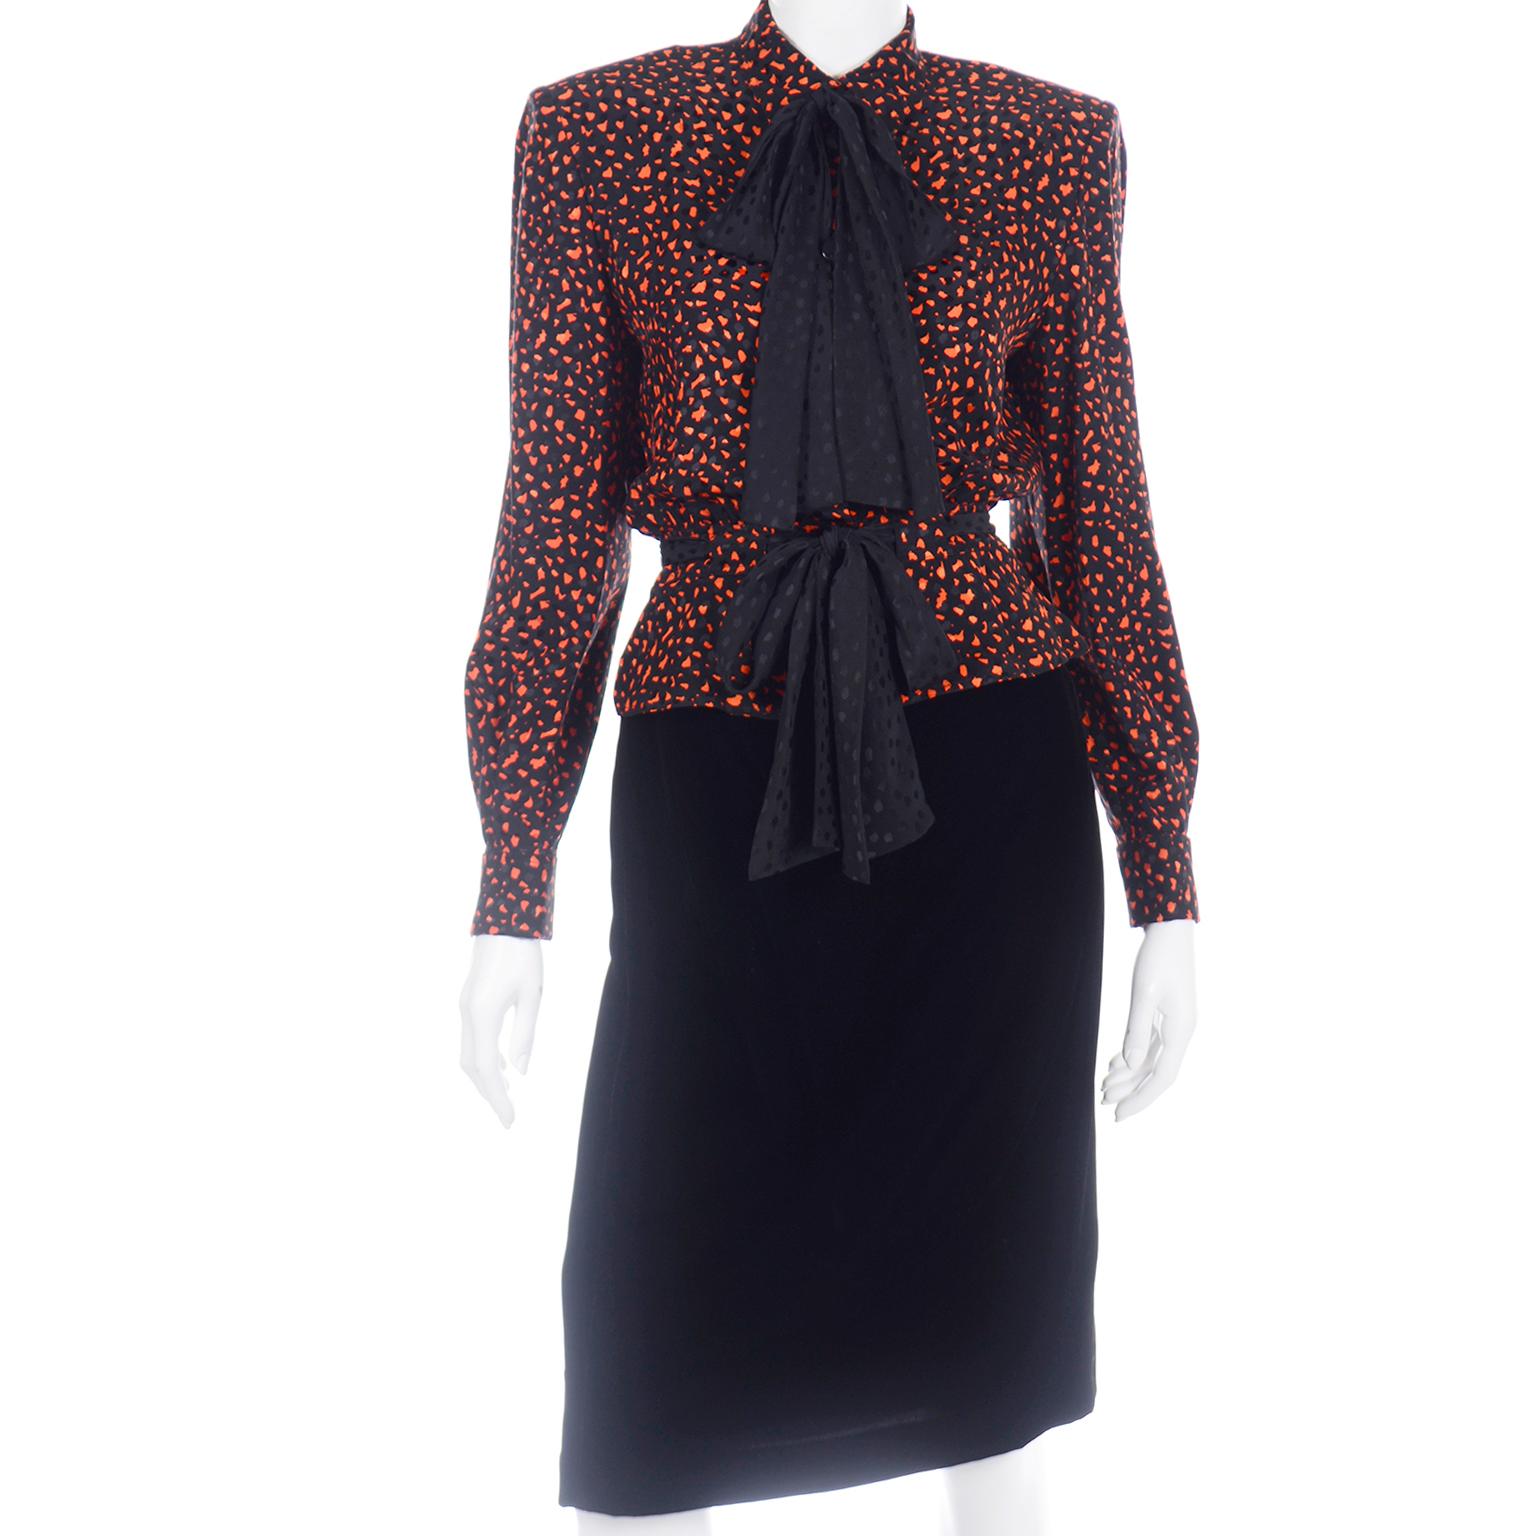 This is a truly fabulous vintage Valentino Miss V suit with a gorgeous orange wool blazer with black velvet trim, a slim black velvet skirt and a beautiful orange and black silk print blouse with black sashes.  We especially love the fit of the